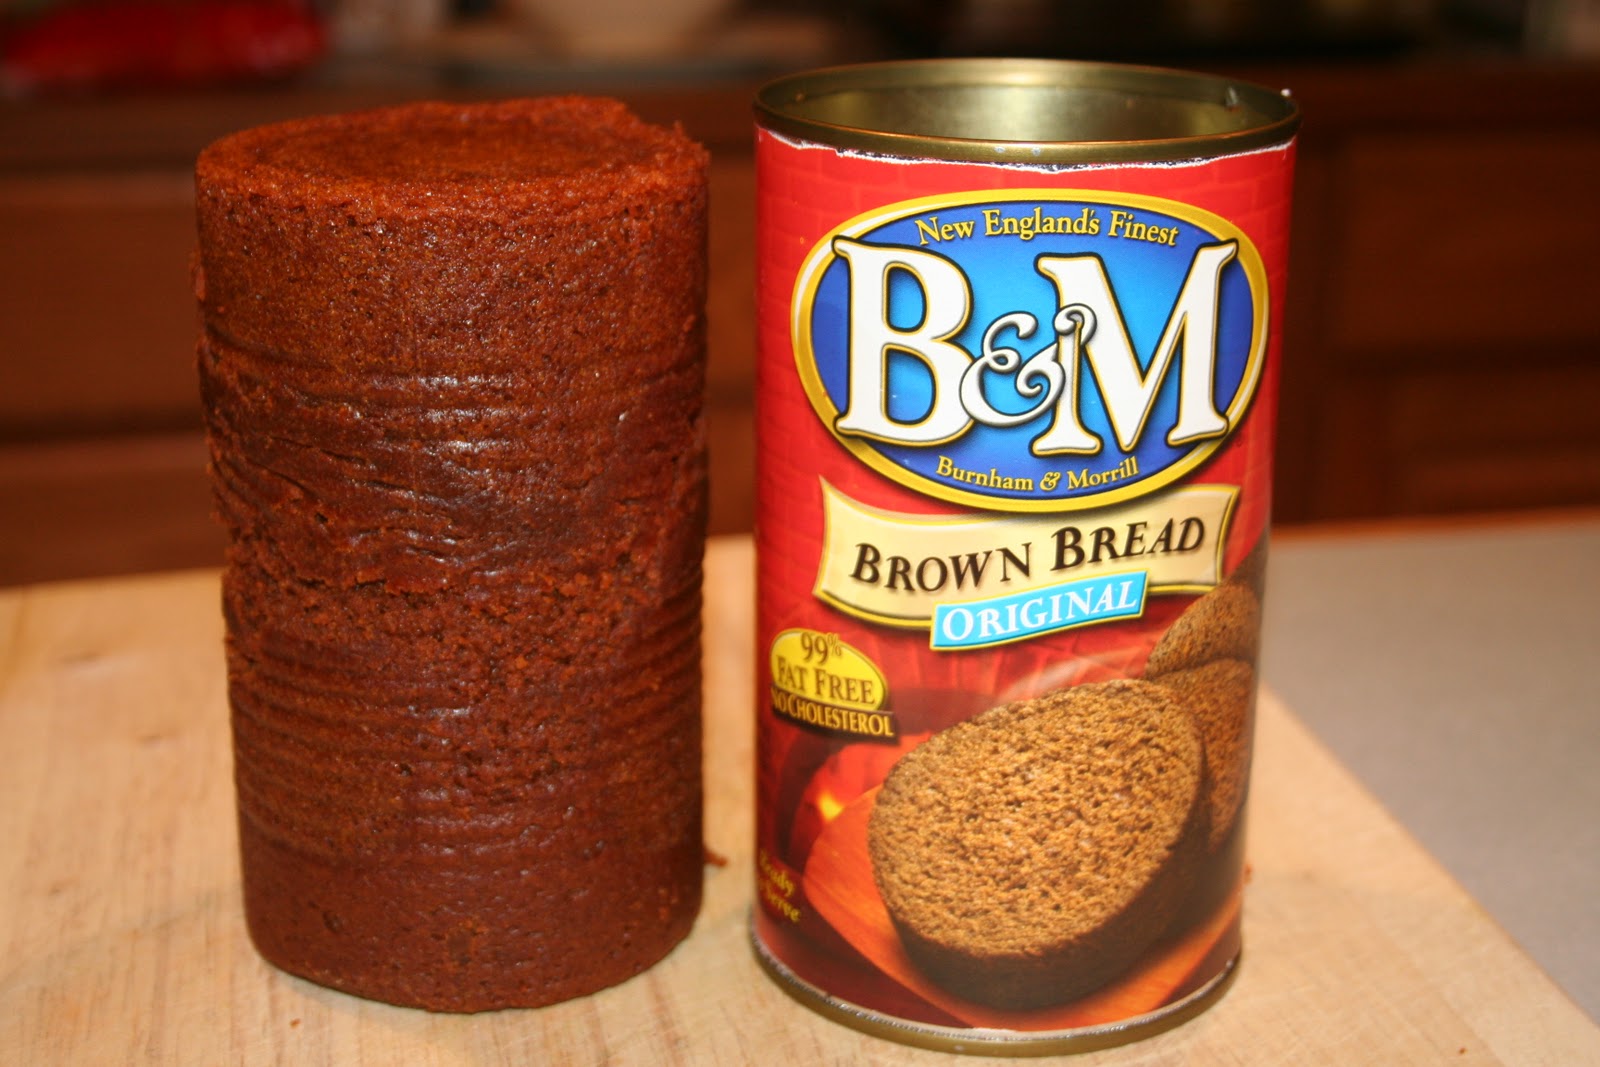 The Surprising Secret Behind Canned Bread Revealed!